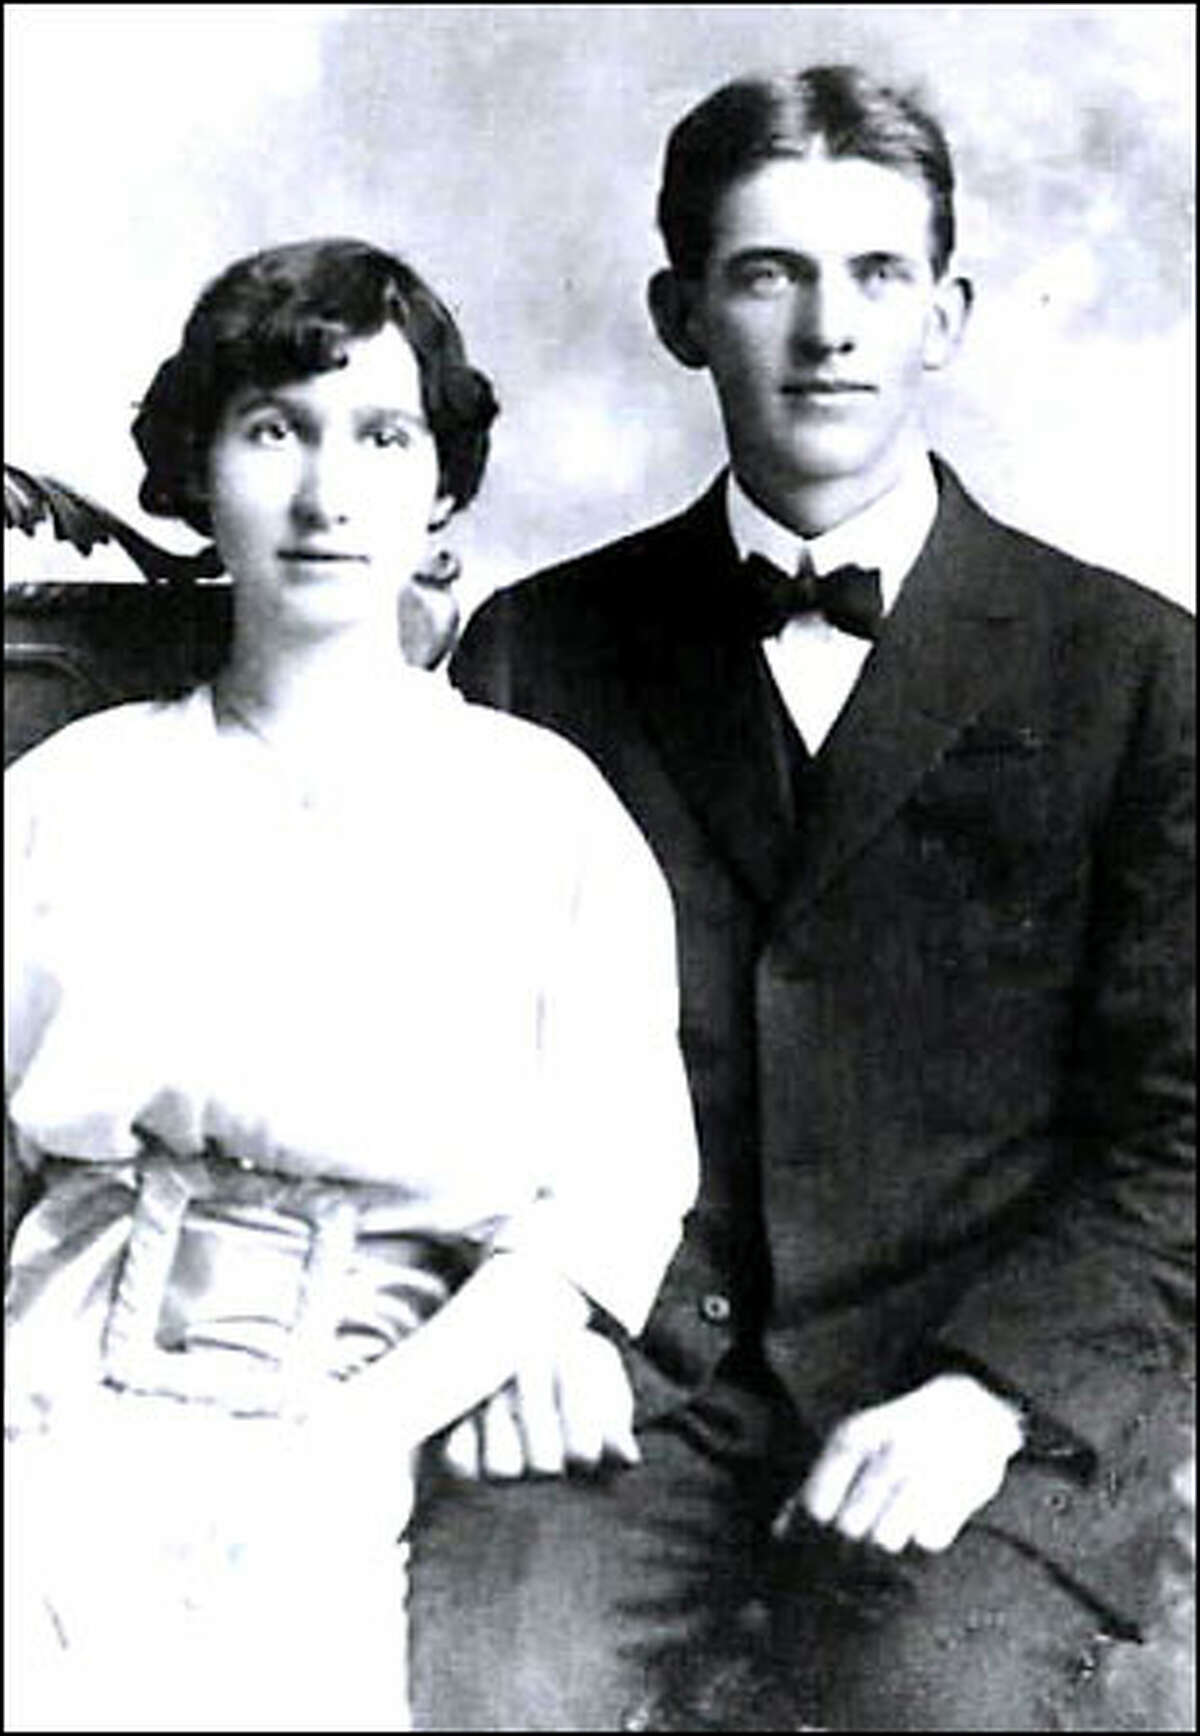 Blanche and Russell Warren vanished on their way home from Port Angeles in 1929 with a new washing machine.